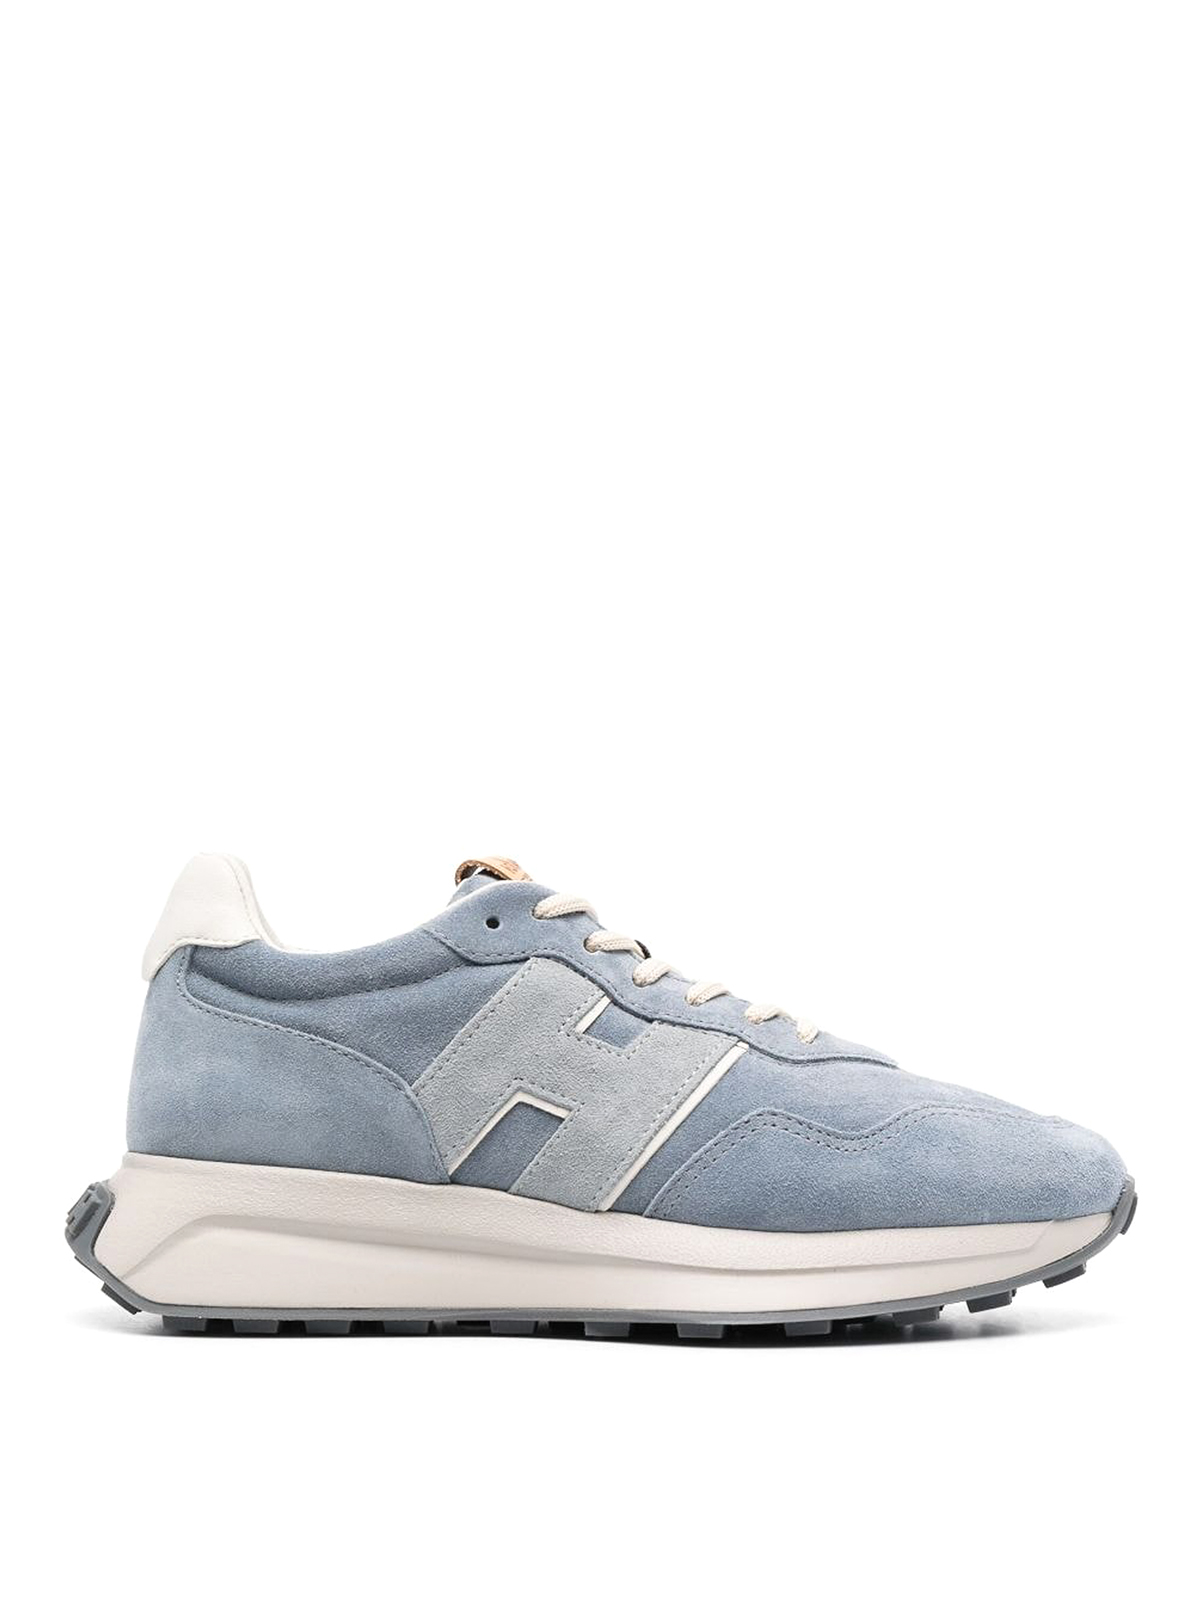 Hogan H641 Chunky Suede Sneakers In Light Blue